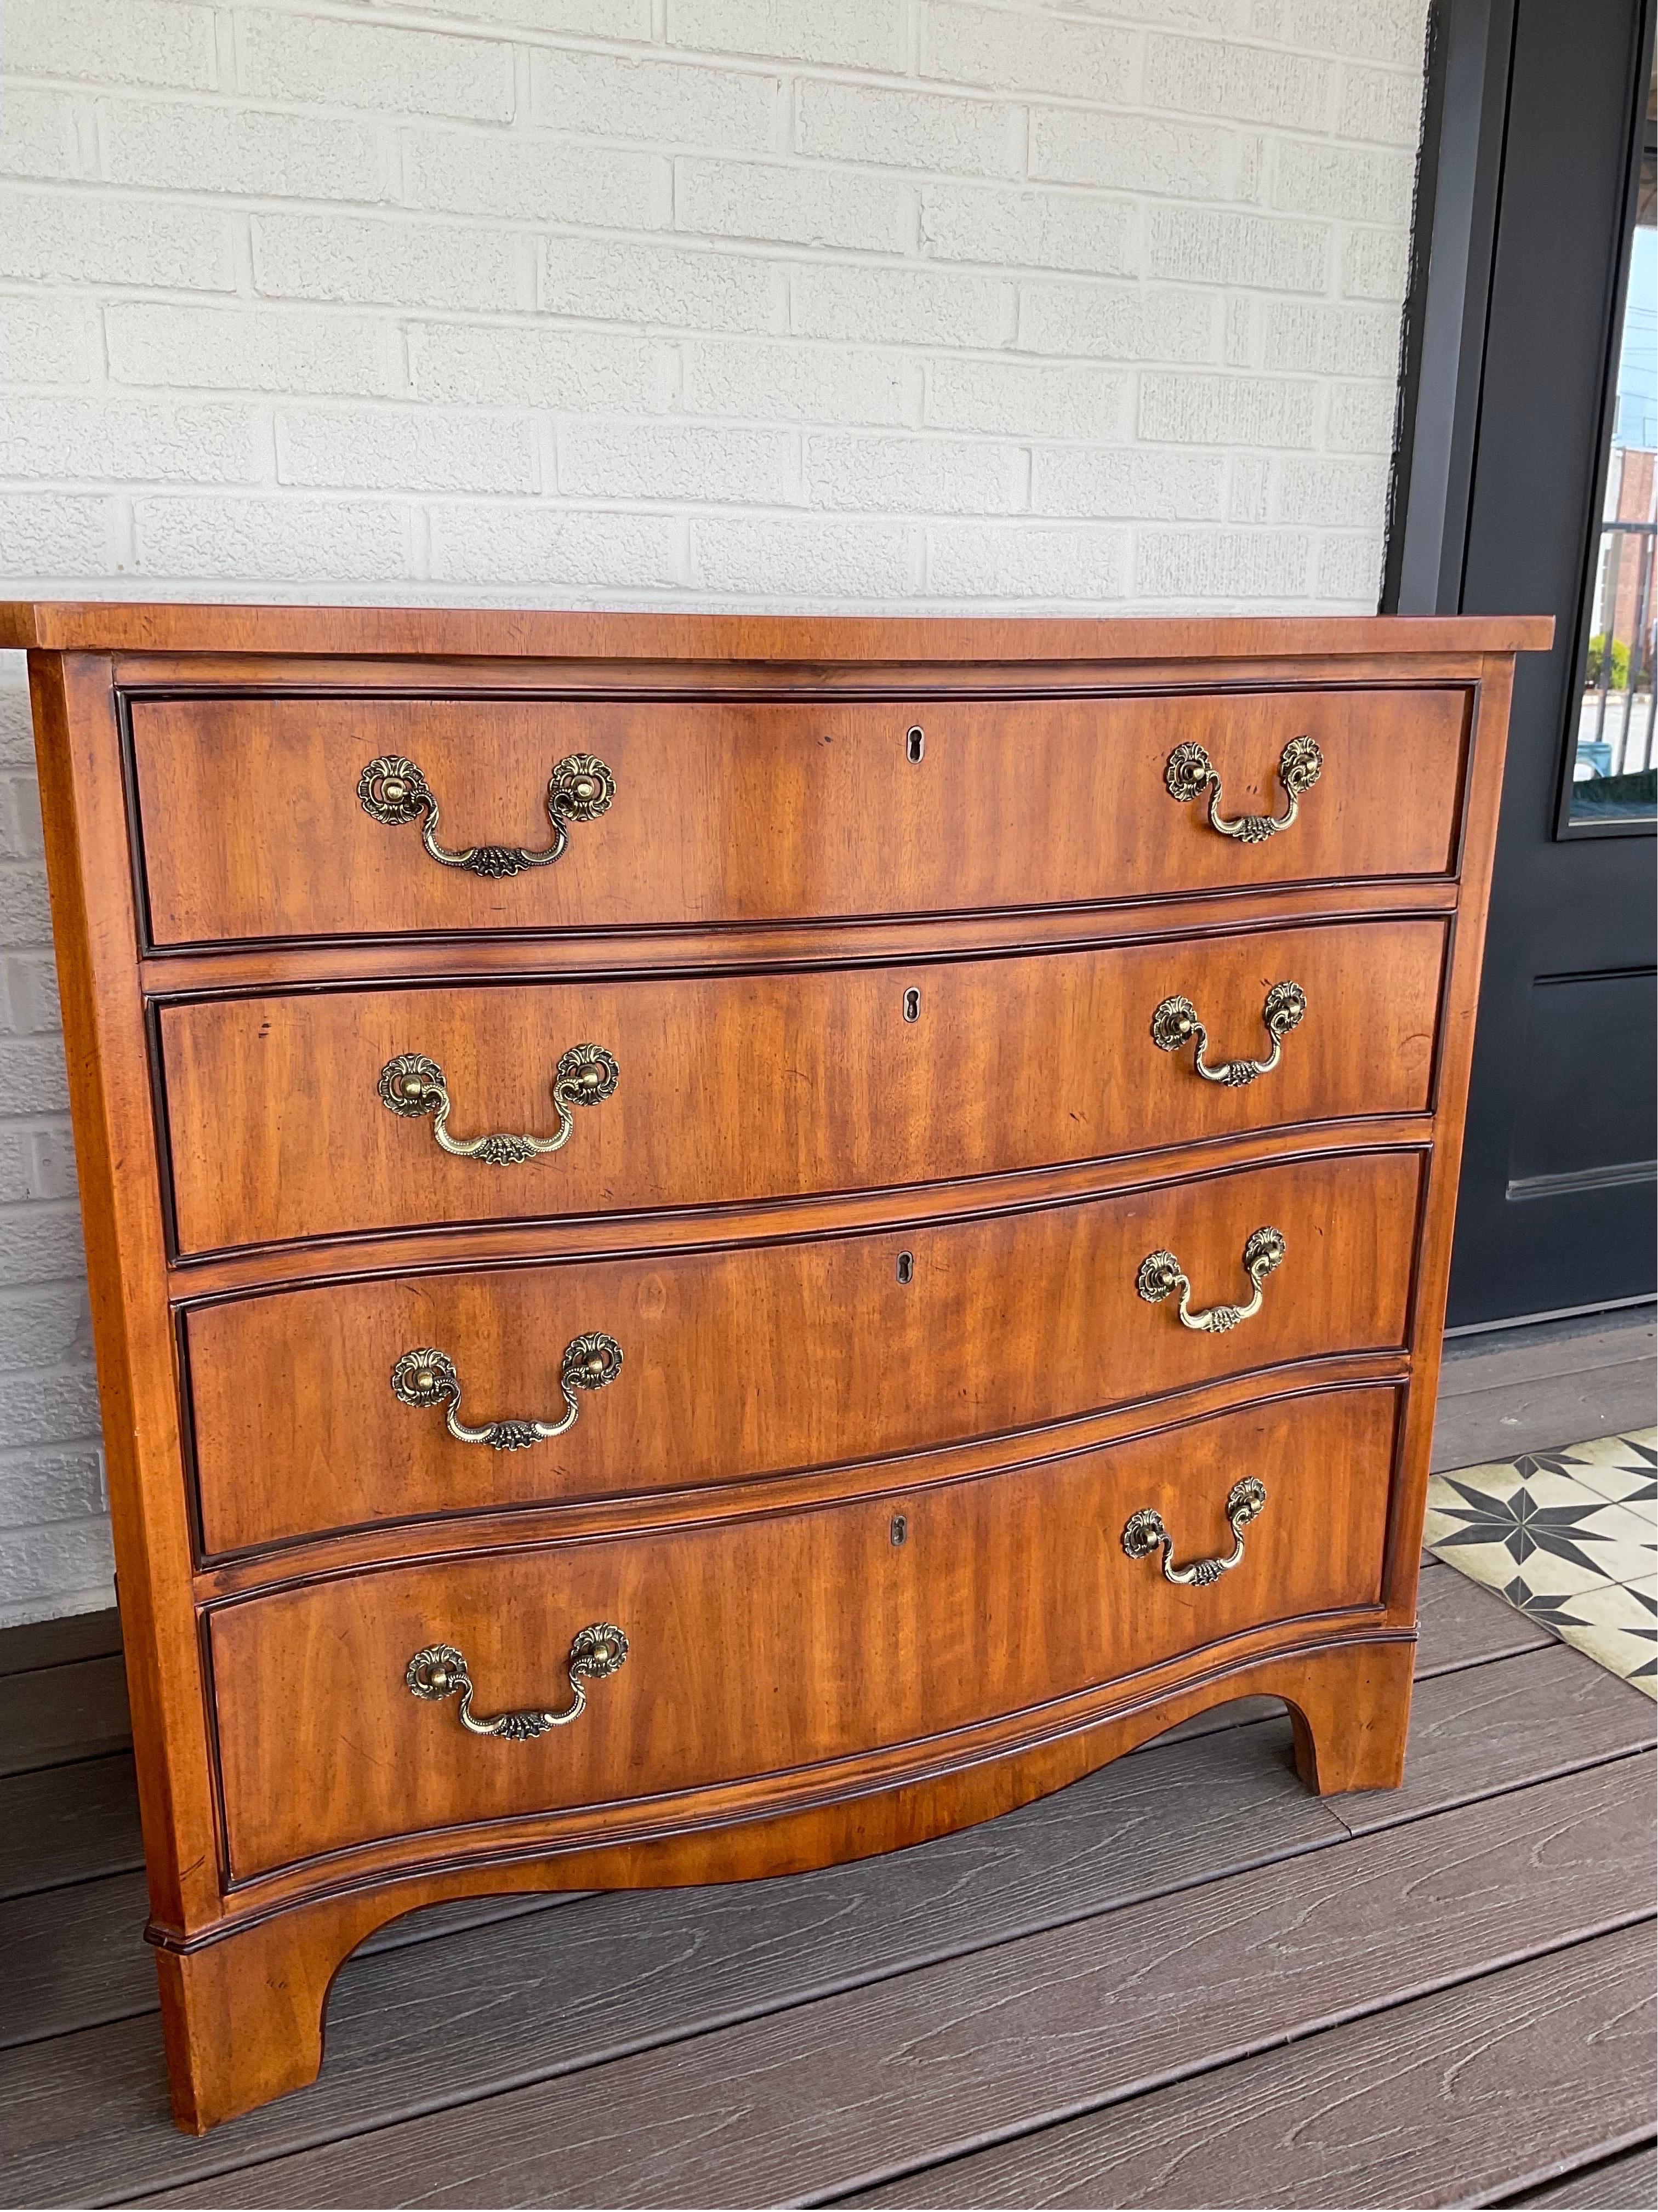 Just a beautiful pair of English Yew Wood Bachelor Chests from Drexel from their Devoncourt Collection. Showing very minor signs of wear, these have been beautifully kept and custom glass tops were made to protect the finishes and are included in